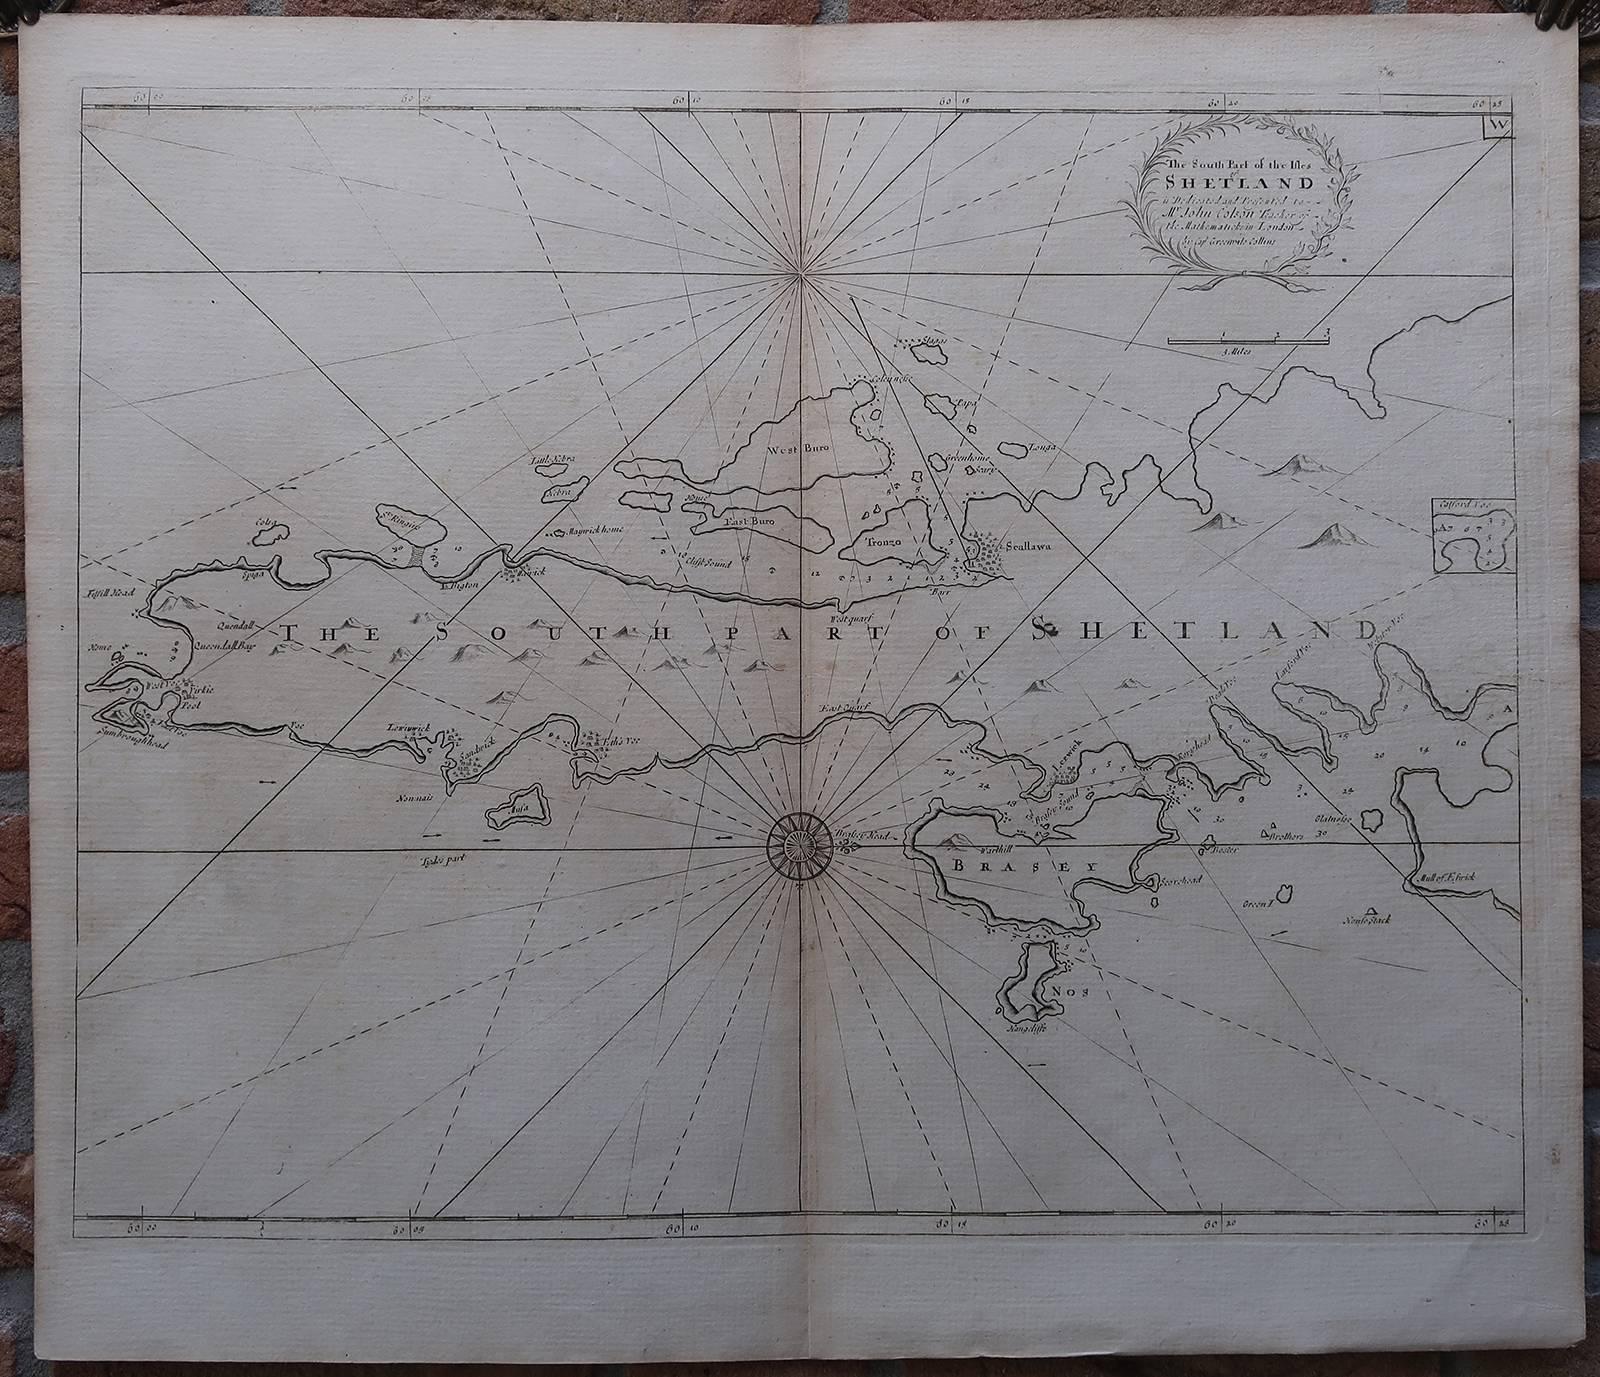 Captain Greenvile Collins Print - The South Part of the Isles of Shetland [...].